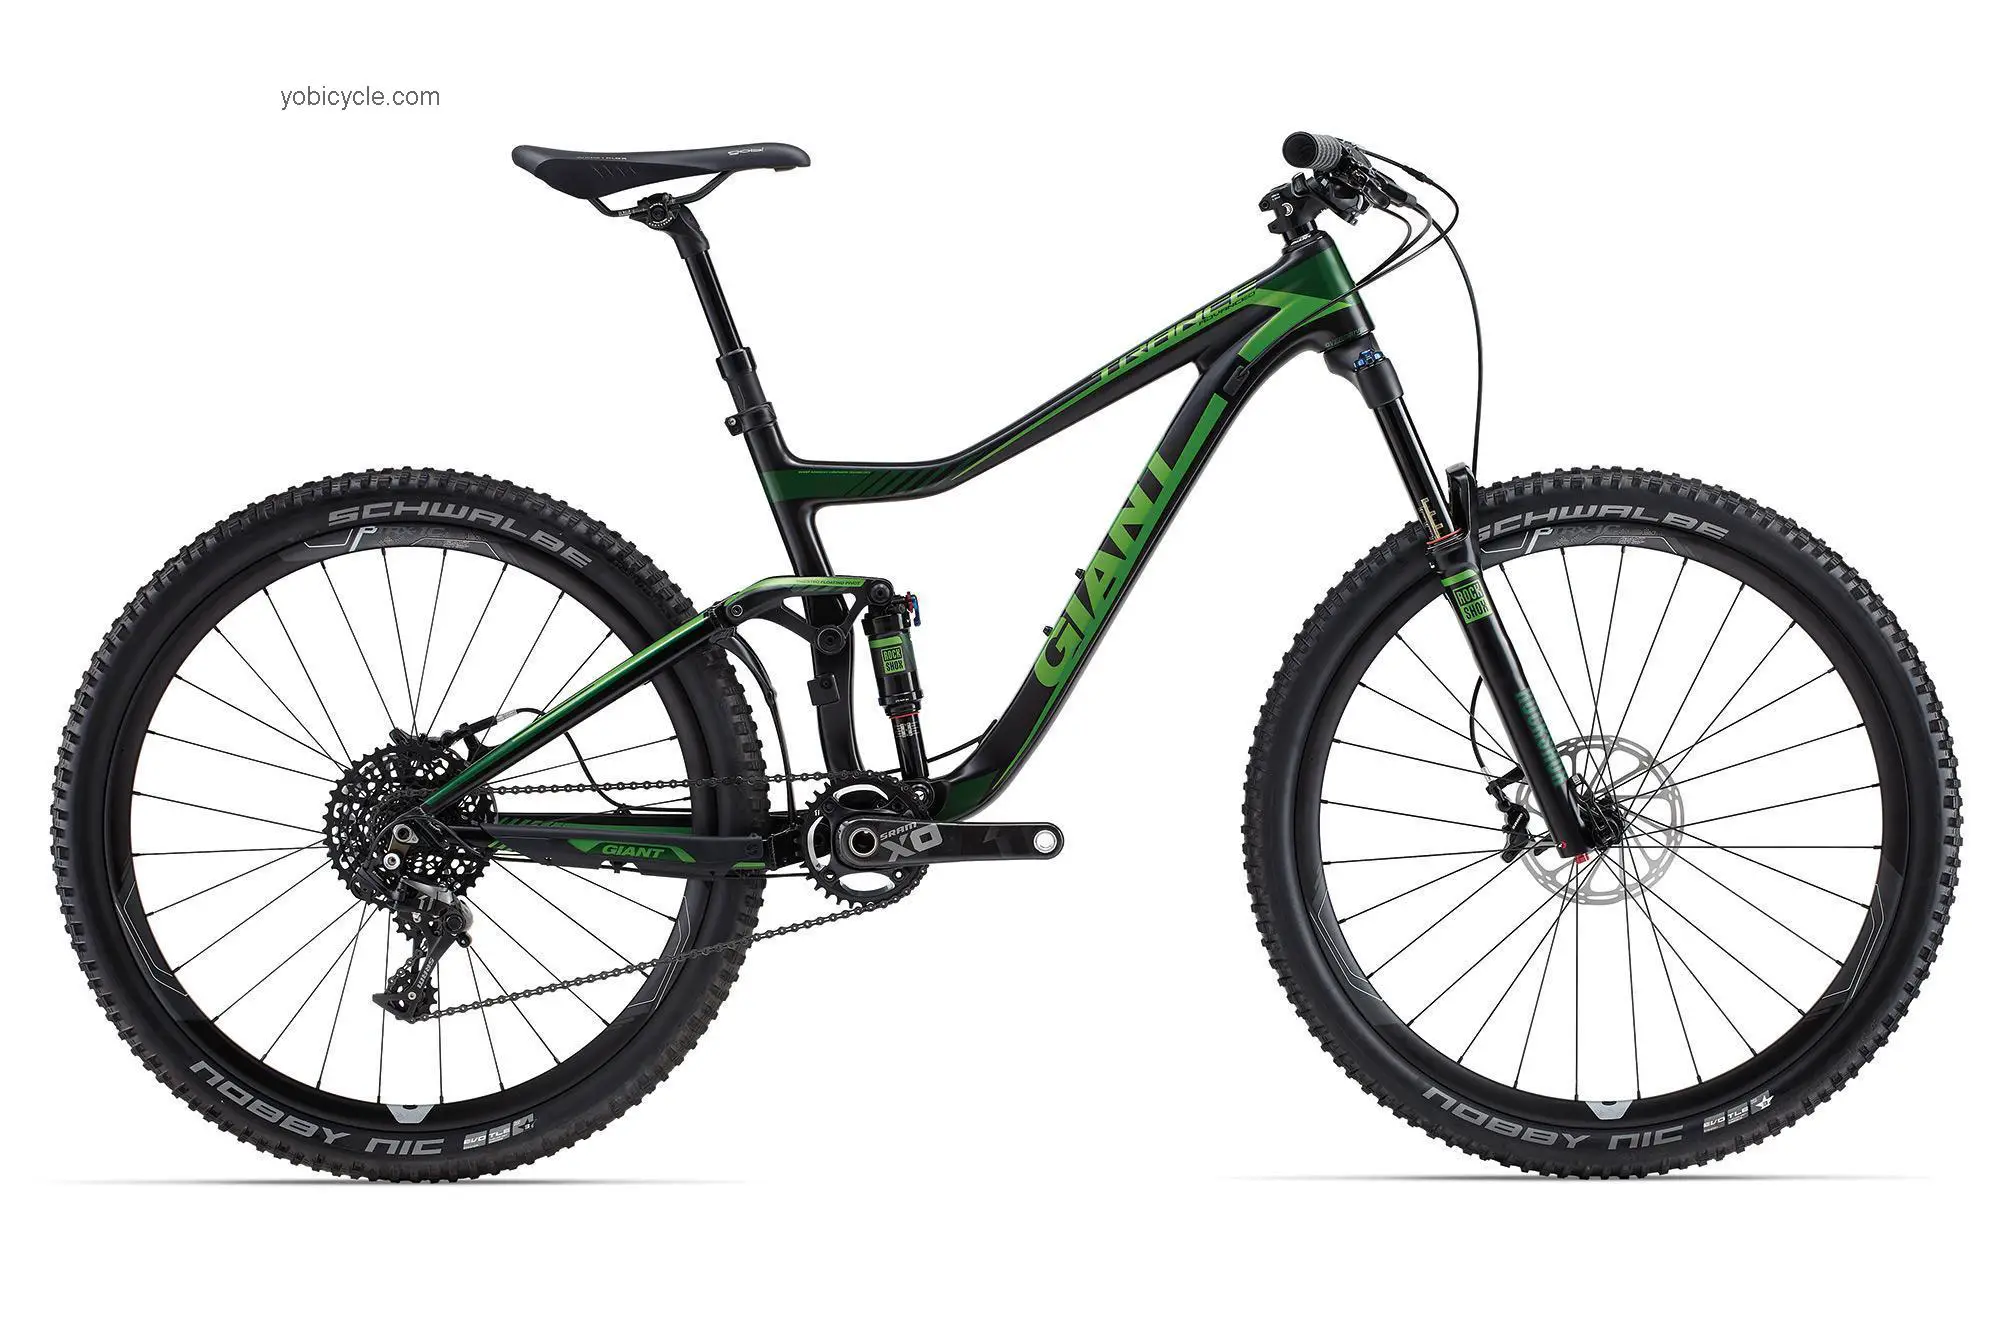 Giant Trance Advanced 27.5 1 2015 comparison online with competitors